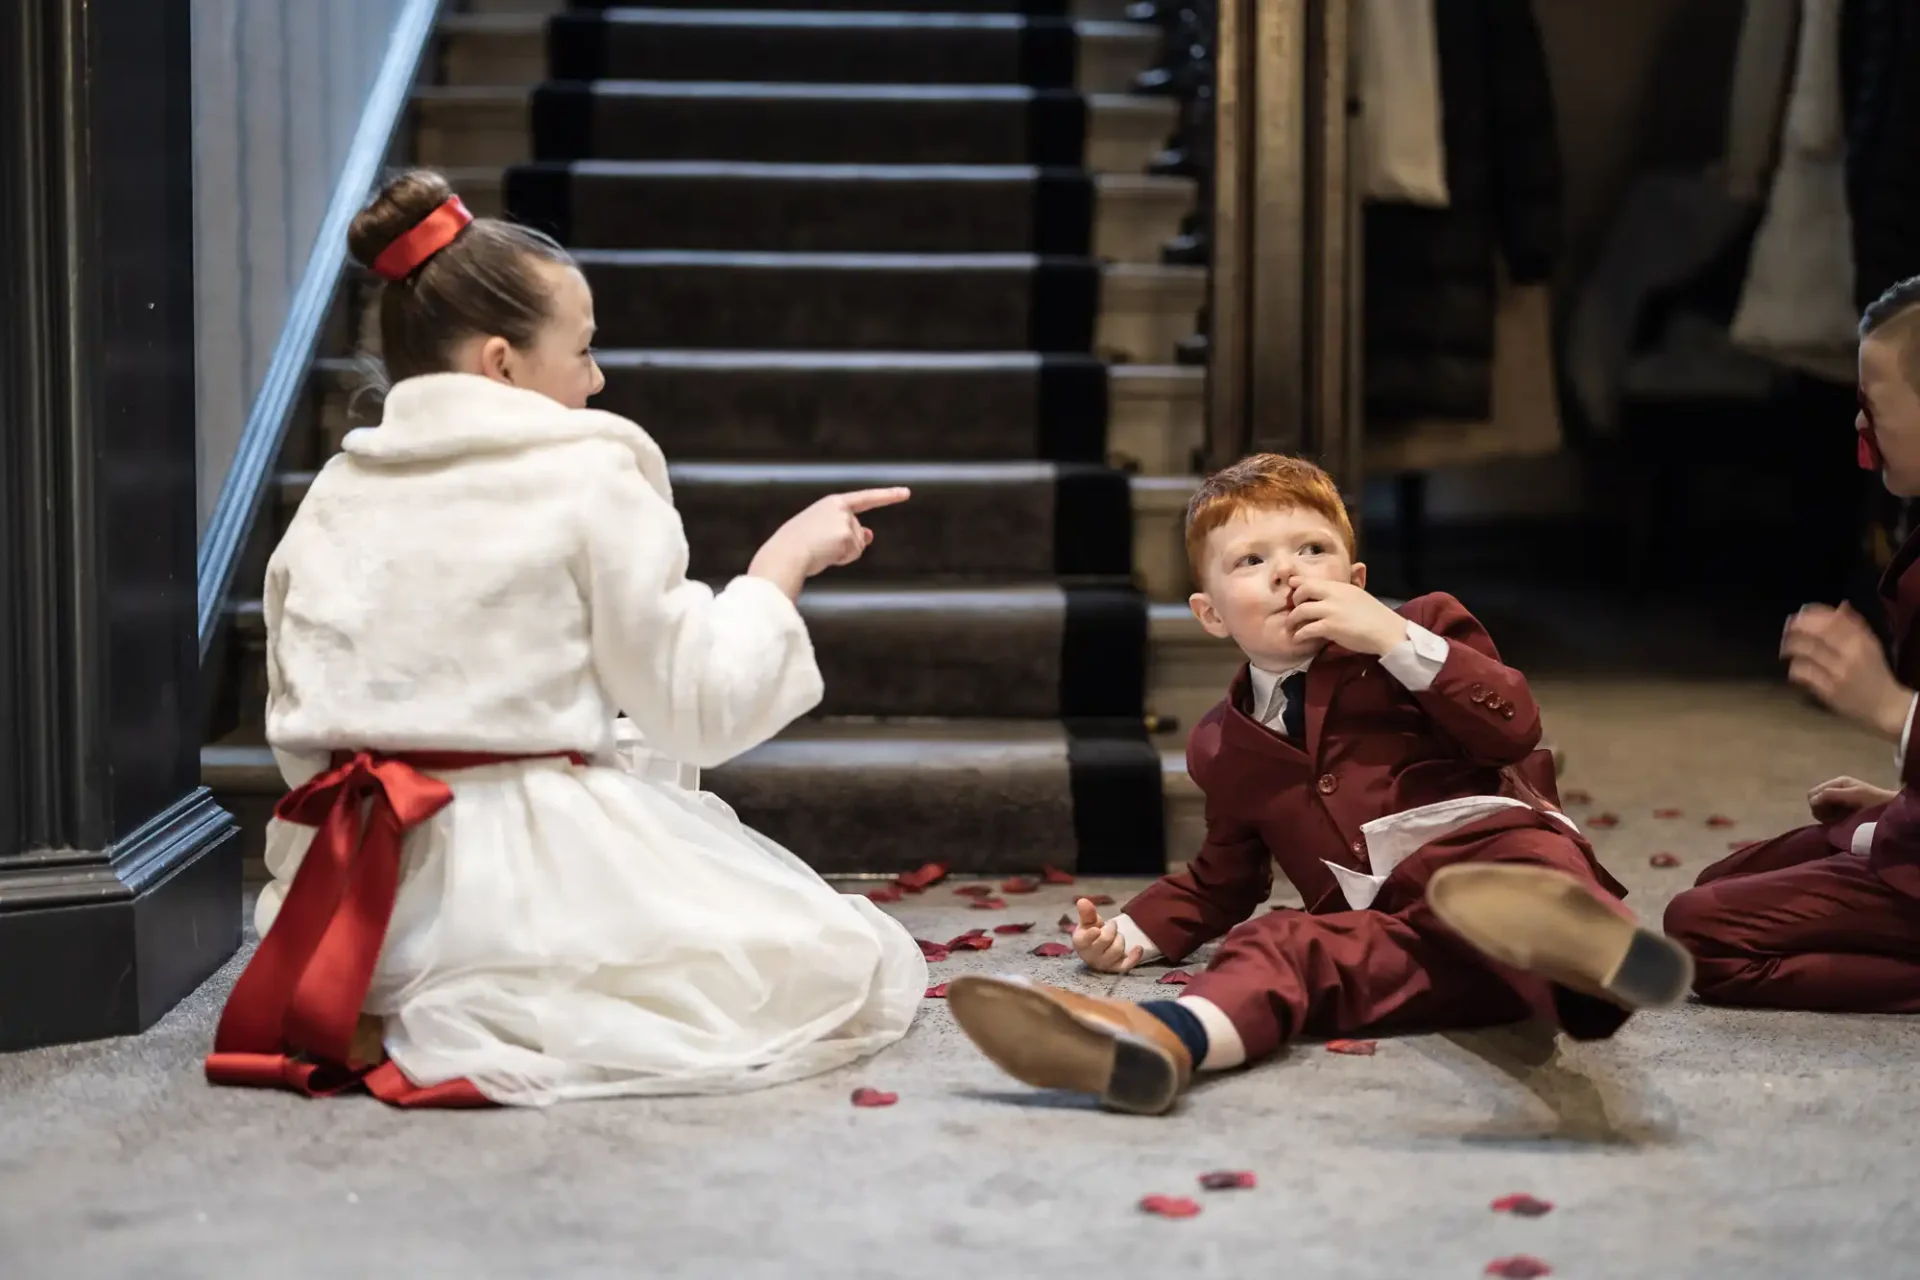 A young boy in a suit sits on the floor looking thoughtful while a girl in a white dress with a red sash points at him, both surrounded by rose petals.